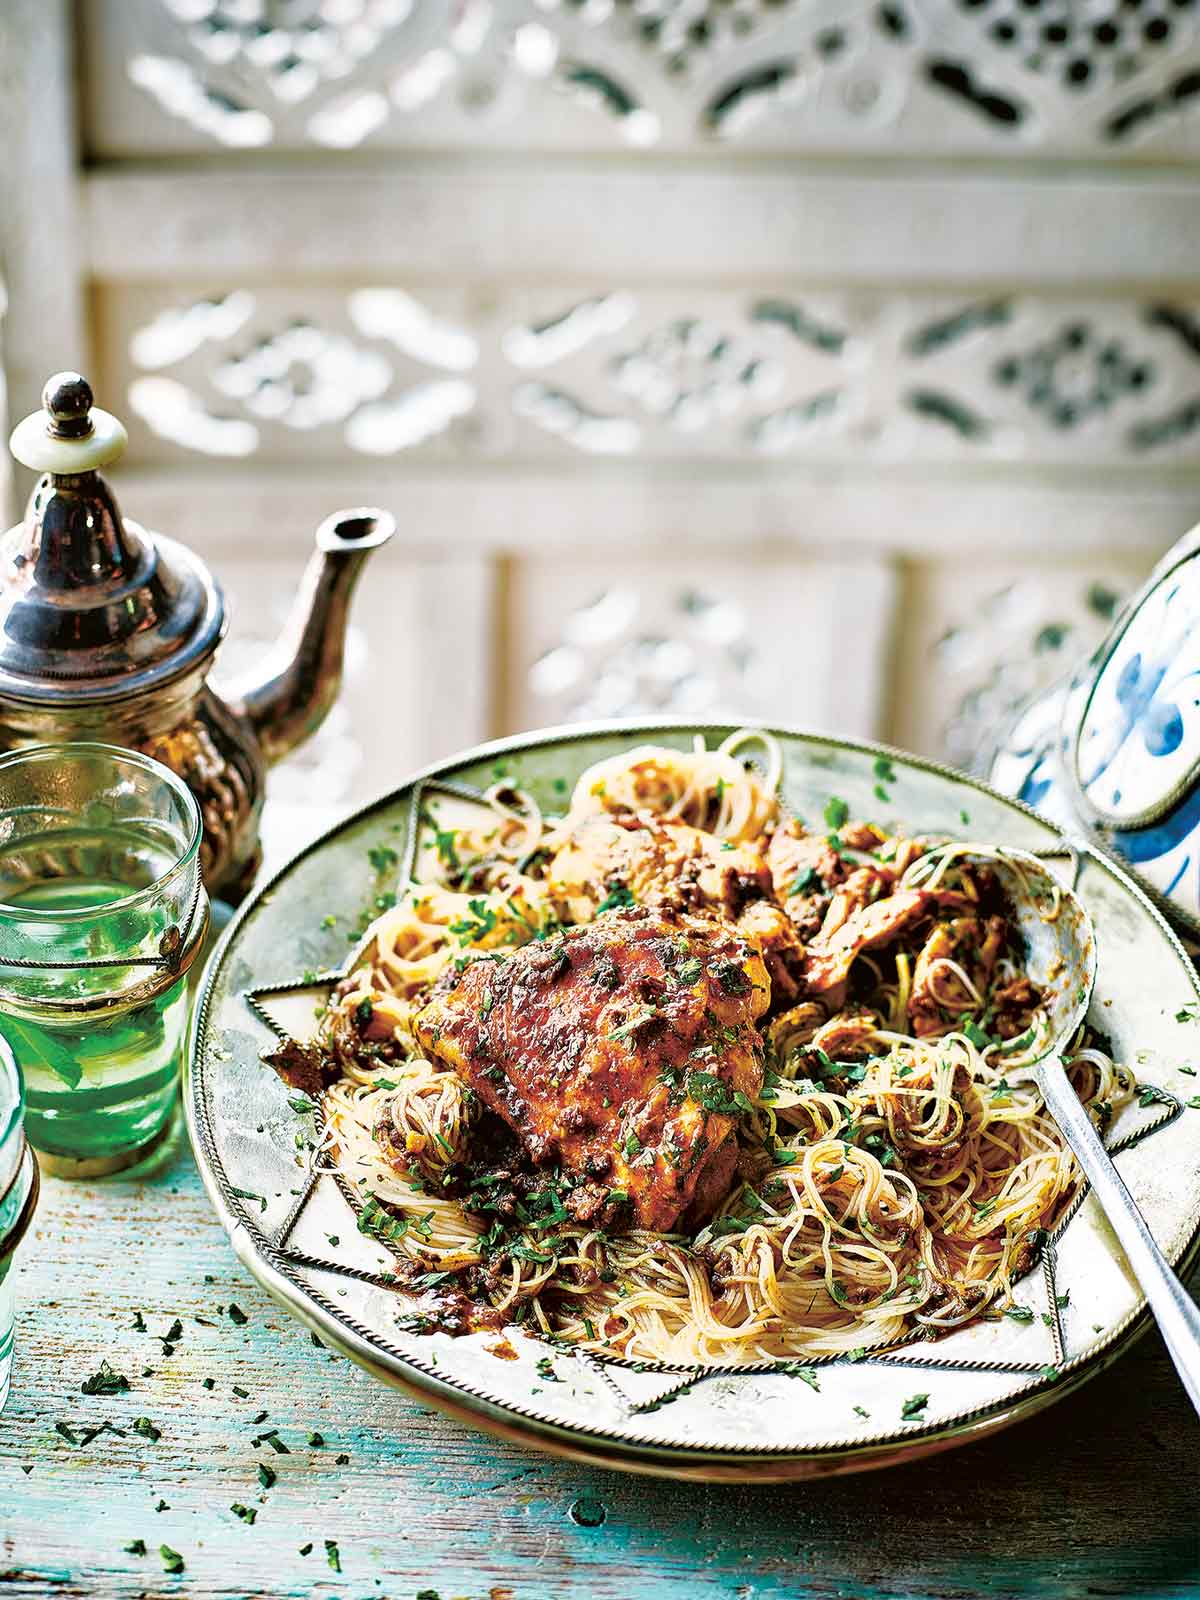 A plate topped with vermicelli noodles, Moroccan chicken thighs, and a spoon resting on the side.